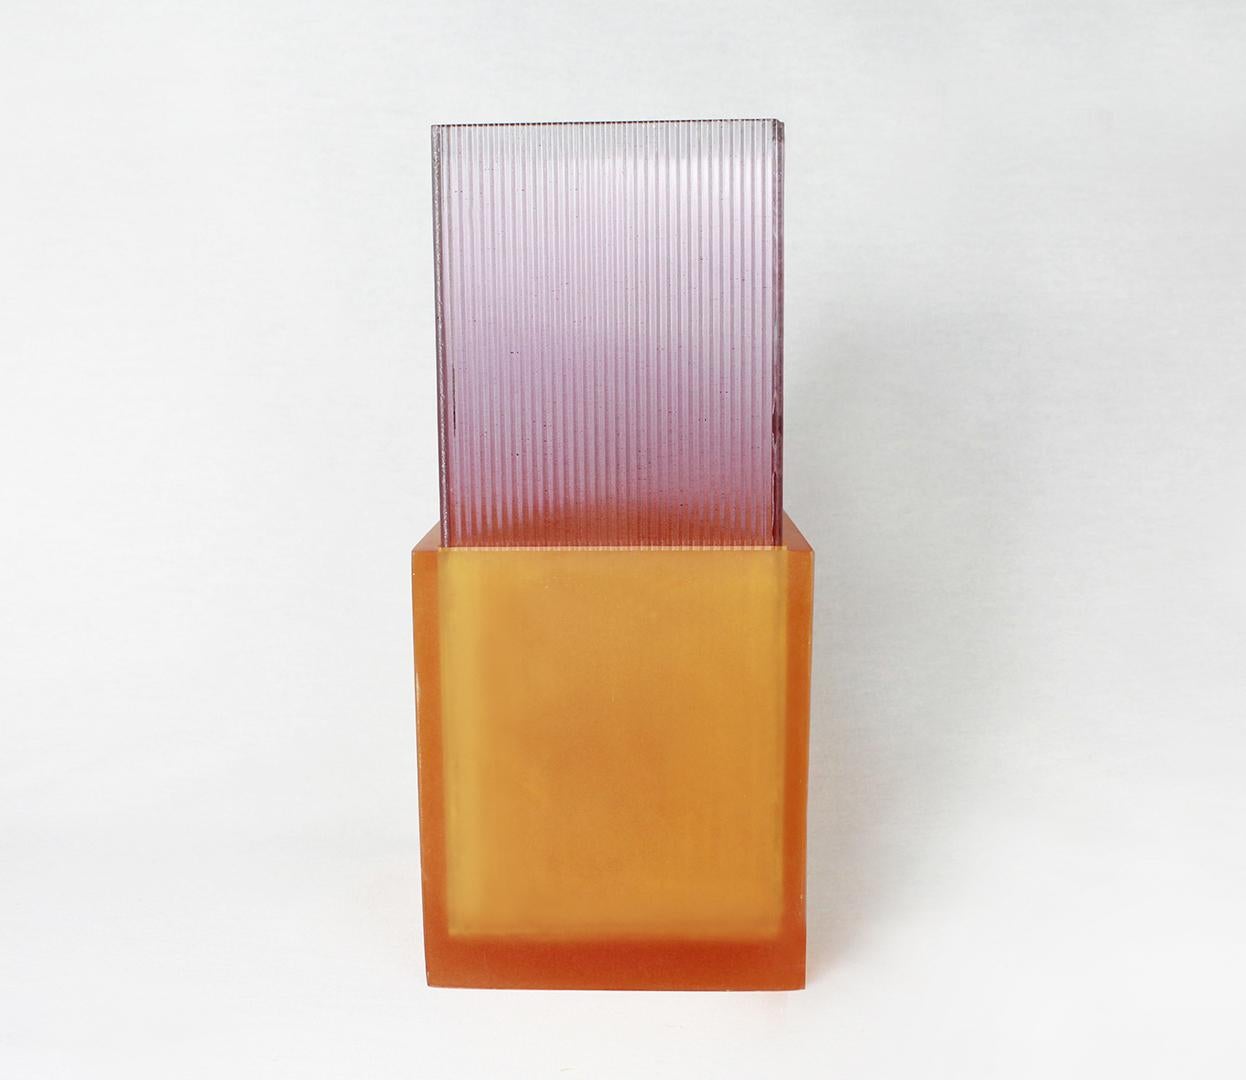 Contemporary Design Vase in Resin Glass Handcrafted Orange and Pink Color For Sale 1